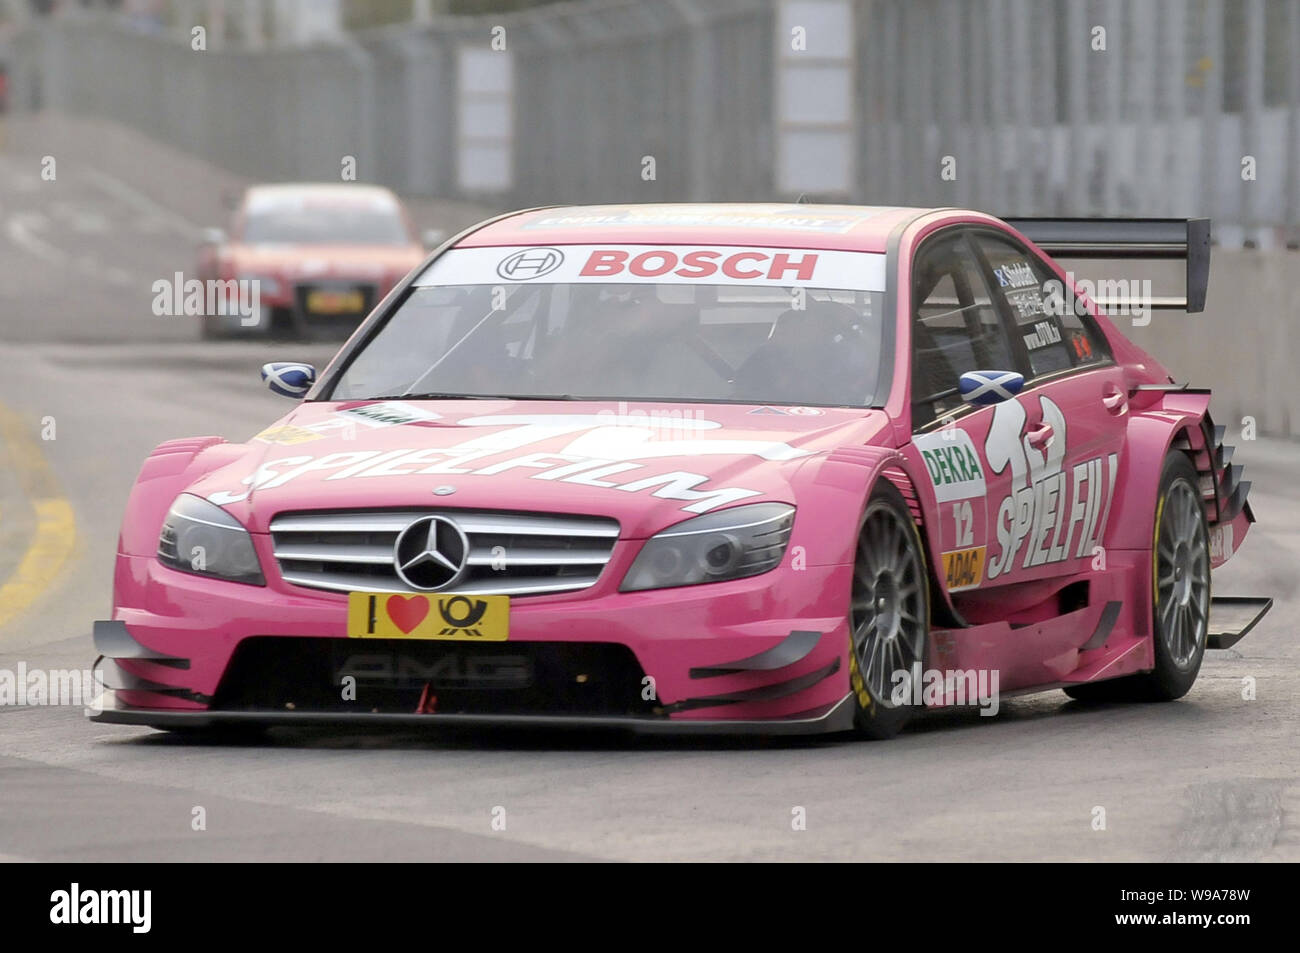 British racer Susie Stoddart of the TV Spielfilm AMG Mercedes and other racers compete during the DTM (Deutsche Tourenwagen Masters) season finale in Stock Photo